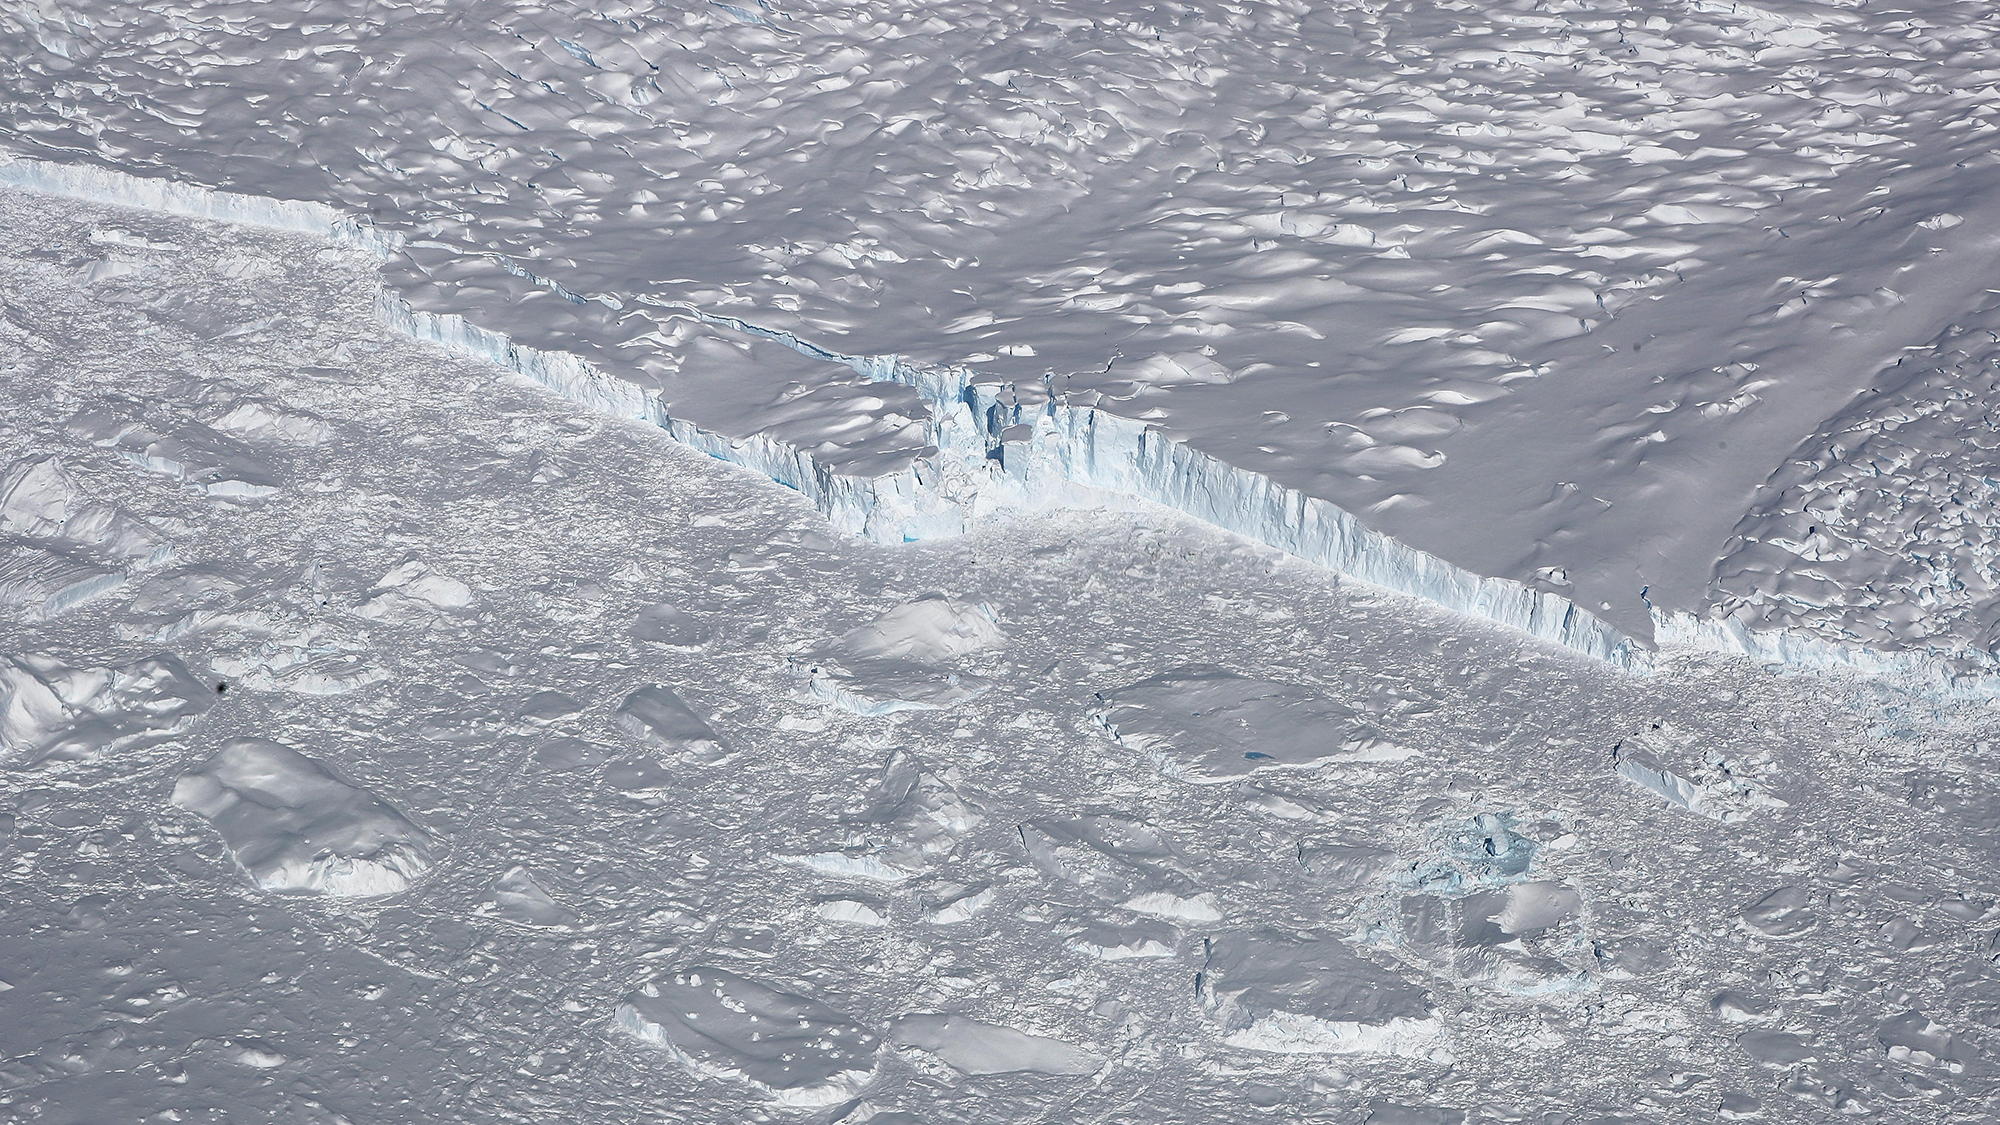 UNSPECIFIED, ANTARCTICA - OCTOBER 31: A calving glacier is seen from NASA's Operation IceBridge research aircraft, in the Antarctic Peninsula region, on October 31, 2017, above Antarctica. NASA's Operation IceBridge has been studying how polar ice has evolved over the past nine years and is currently flying a set of nine-hour research flights over West Antarctica to monitor ice loss aboard a retrofitted 1966 Lockheed P-3 aircraft. According to NASA, the current mission targets 'sea ice in the Bellingshausen and Weddell seas and glaciers in the Antarctic Peninsula and along the English and Bryan Coasts.' Researchers have used the IceBridge data to observe that the West Antarctic Ice Sheet may be in a state of irreversible decline directly contributing to rising sea levels. The National Climate Assessment, a study produced every 4 years by scientists from 13 federal agencies of the U.S. government, released a stark report November 2 stating that global temperature rise over the past 115 years has been primarily caused by 'human activities, especially emissions of greenhouse gases'. (Photo by Mario Tama/Getty Images)